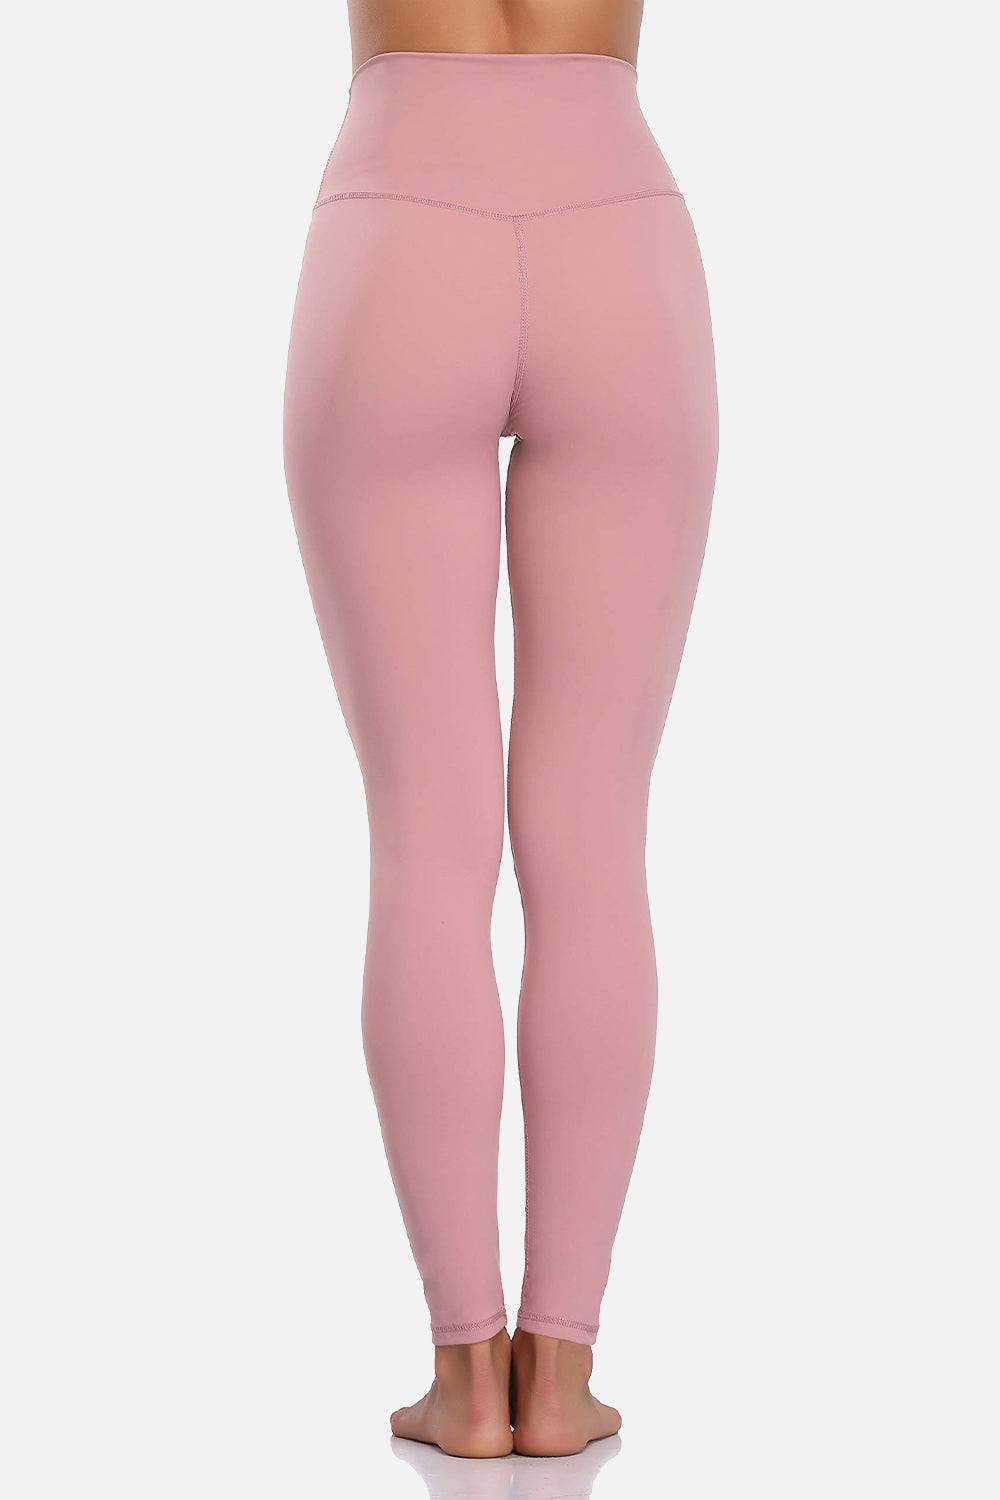 Colorfulkoala High-Waisted Leggings Are on Sale for $17 at